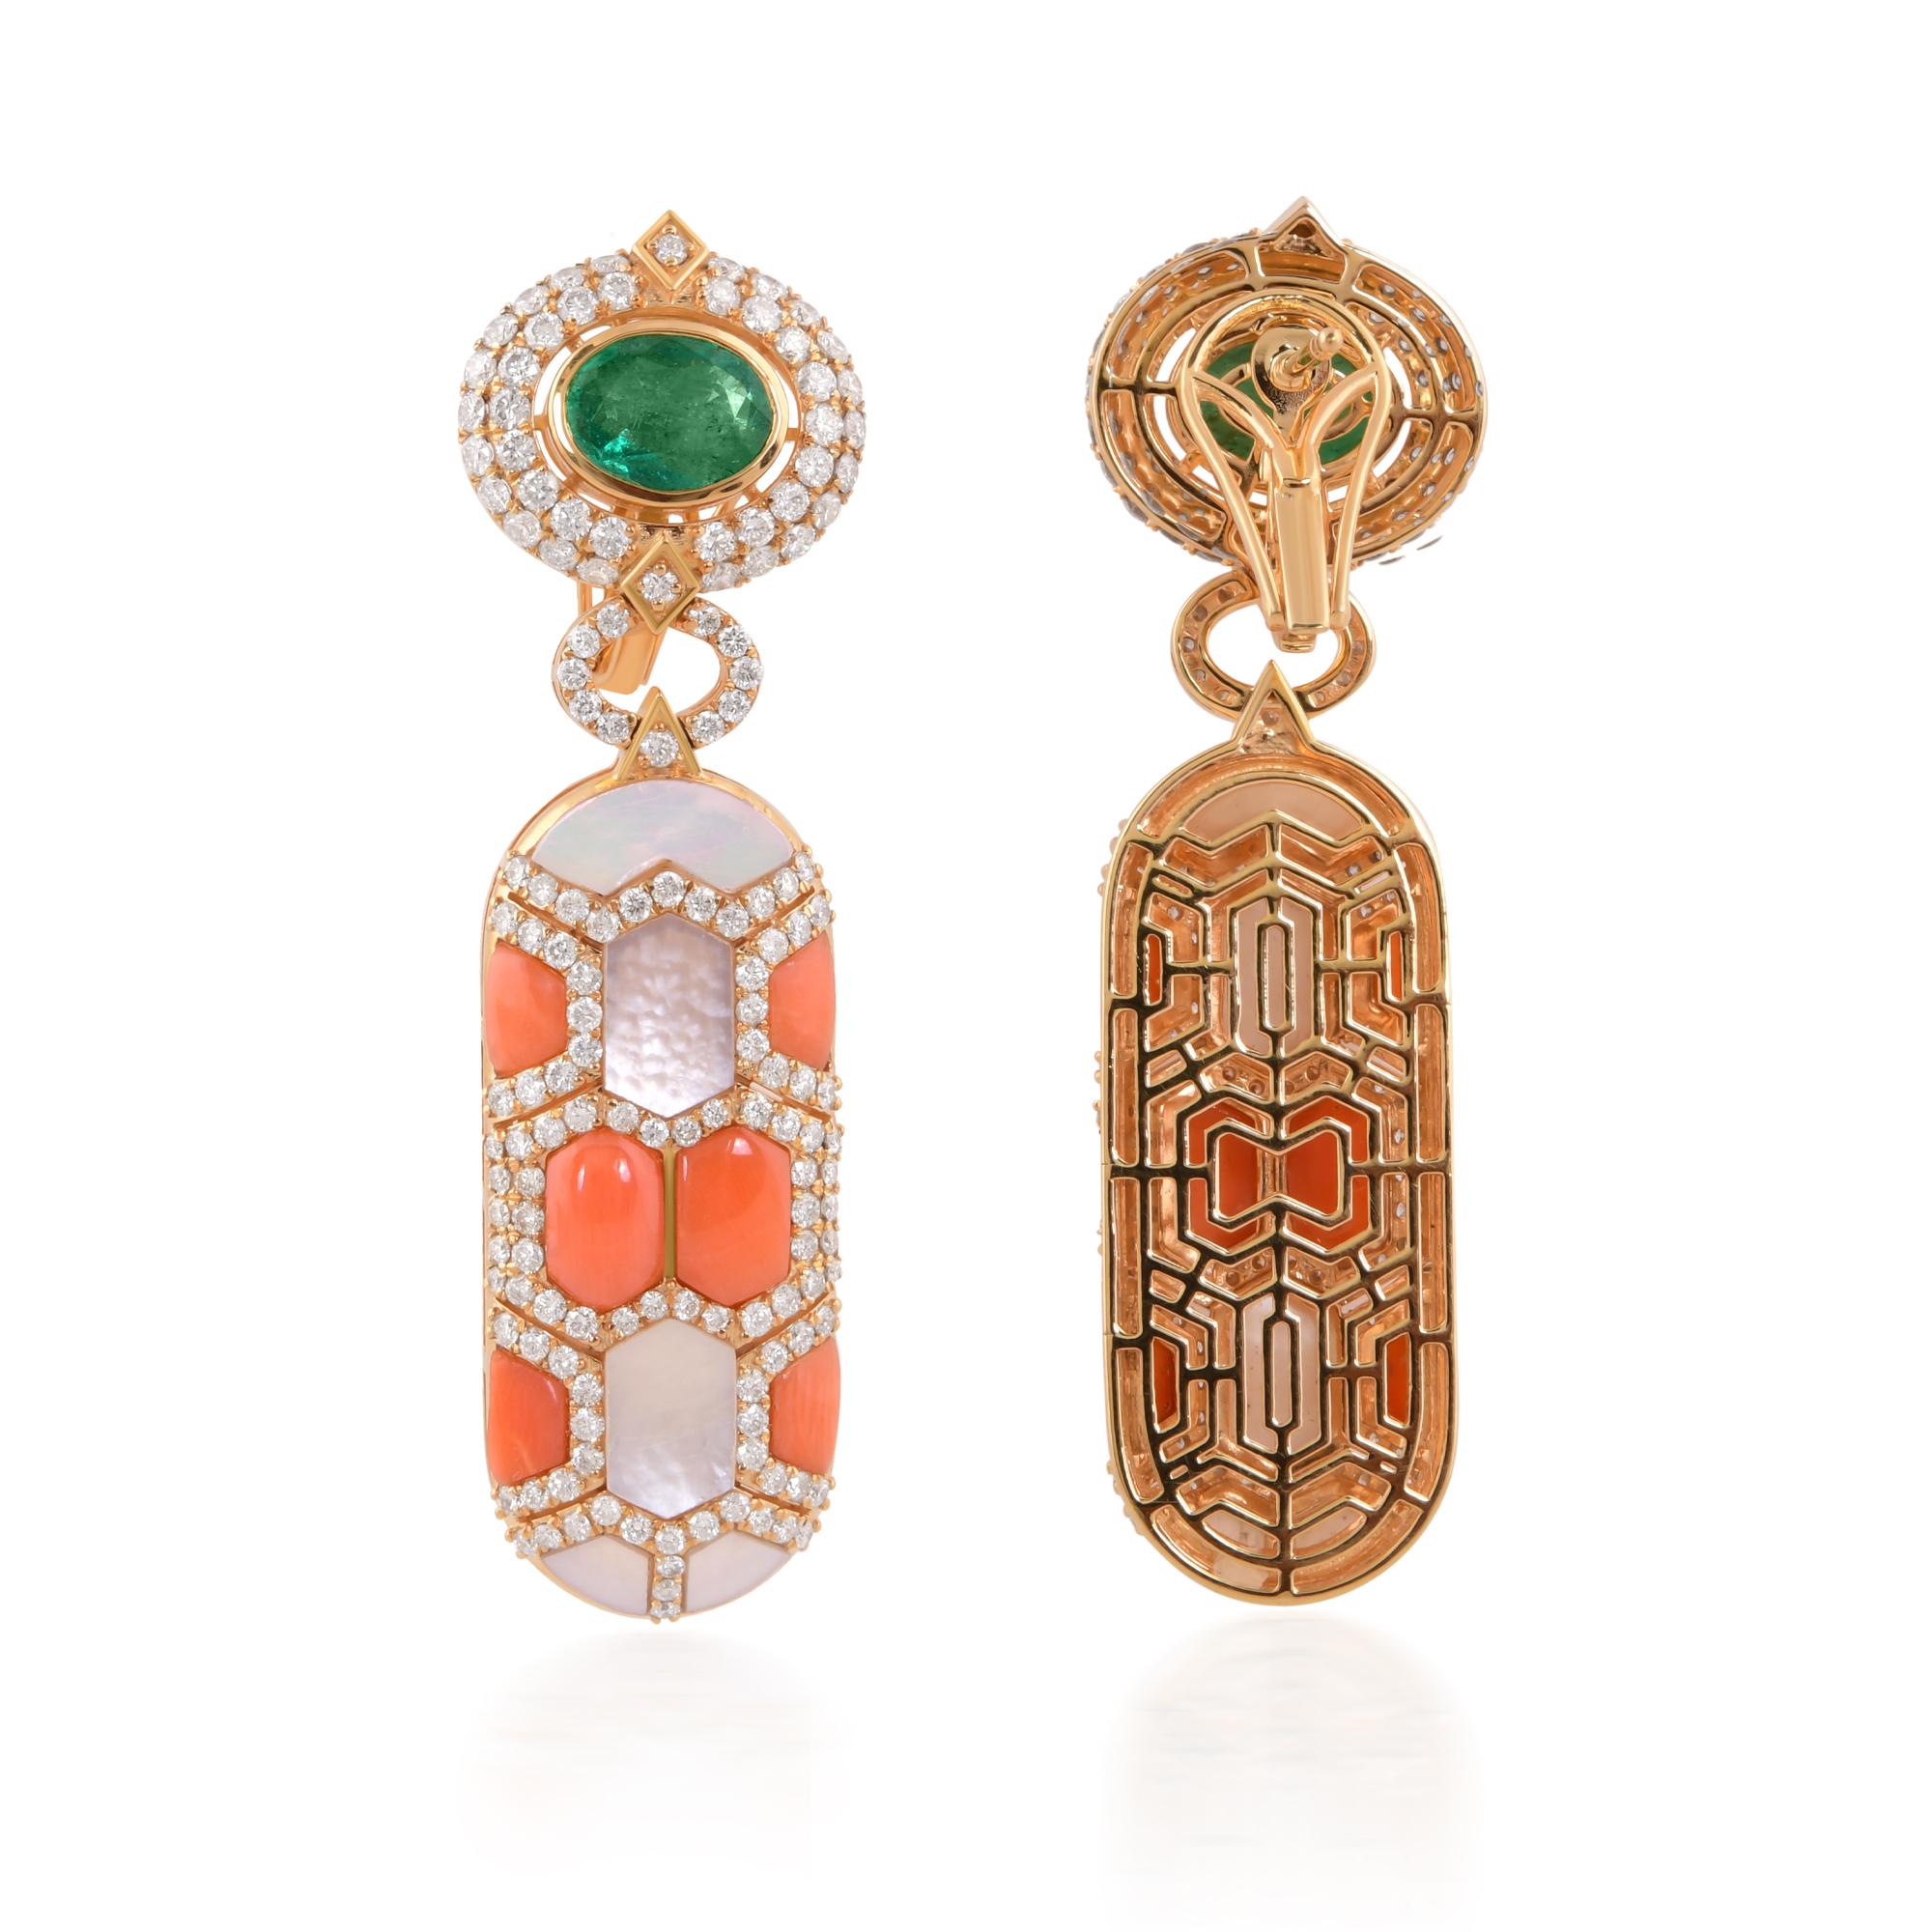 At the heart of each earring, vibrant coral gemstones radiate warmth and vitality, their natural hues reminiscent of the ocean's depths. Complementing the coral are lush emeralds, each possessing a rich green hue that exudes sophistication and